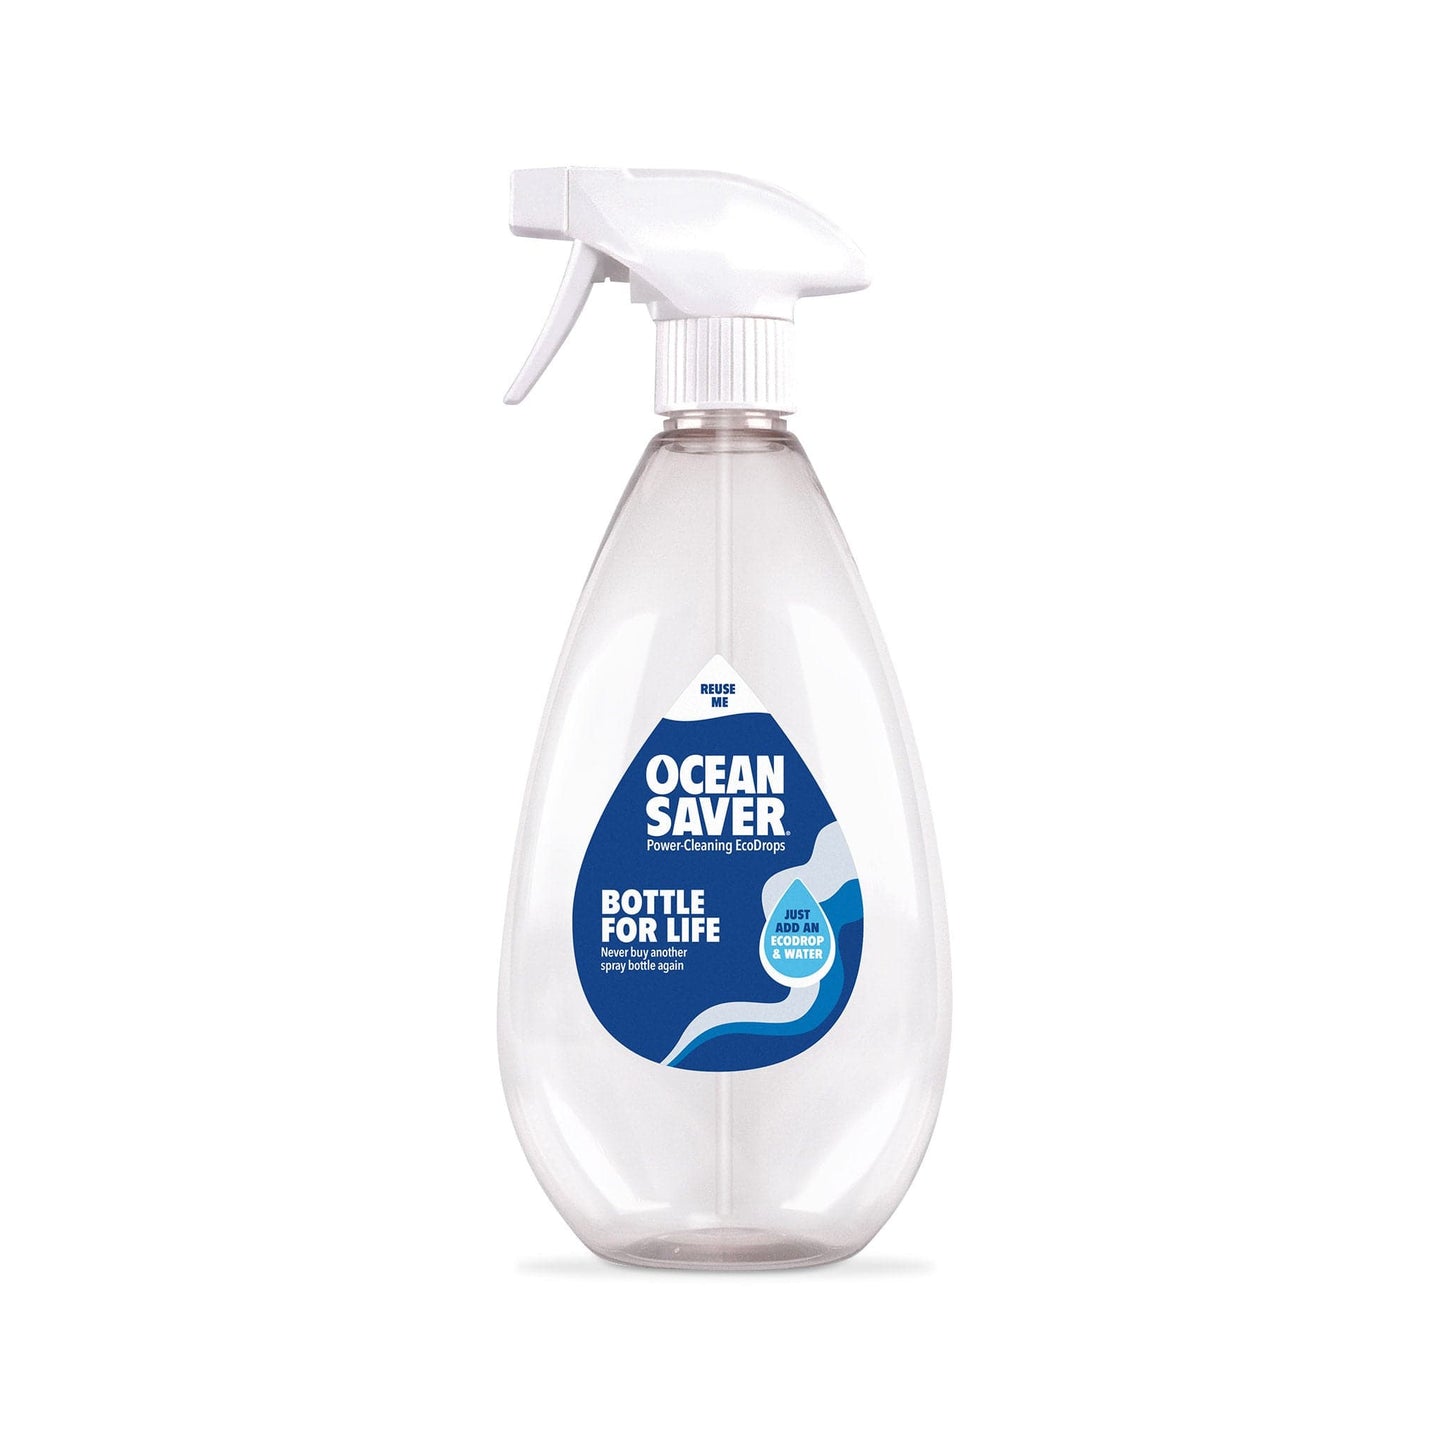 Load image into Gallery viewer, Ocean Saver All-Purpose Cleaners Ocean Saver Bottle for Life 750ml - Made from Prevented Ocean Plastic
